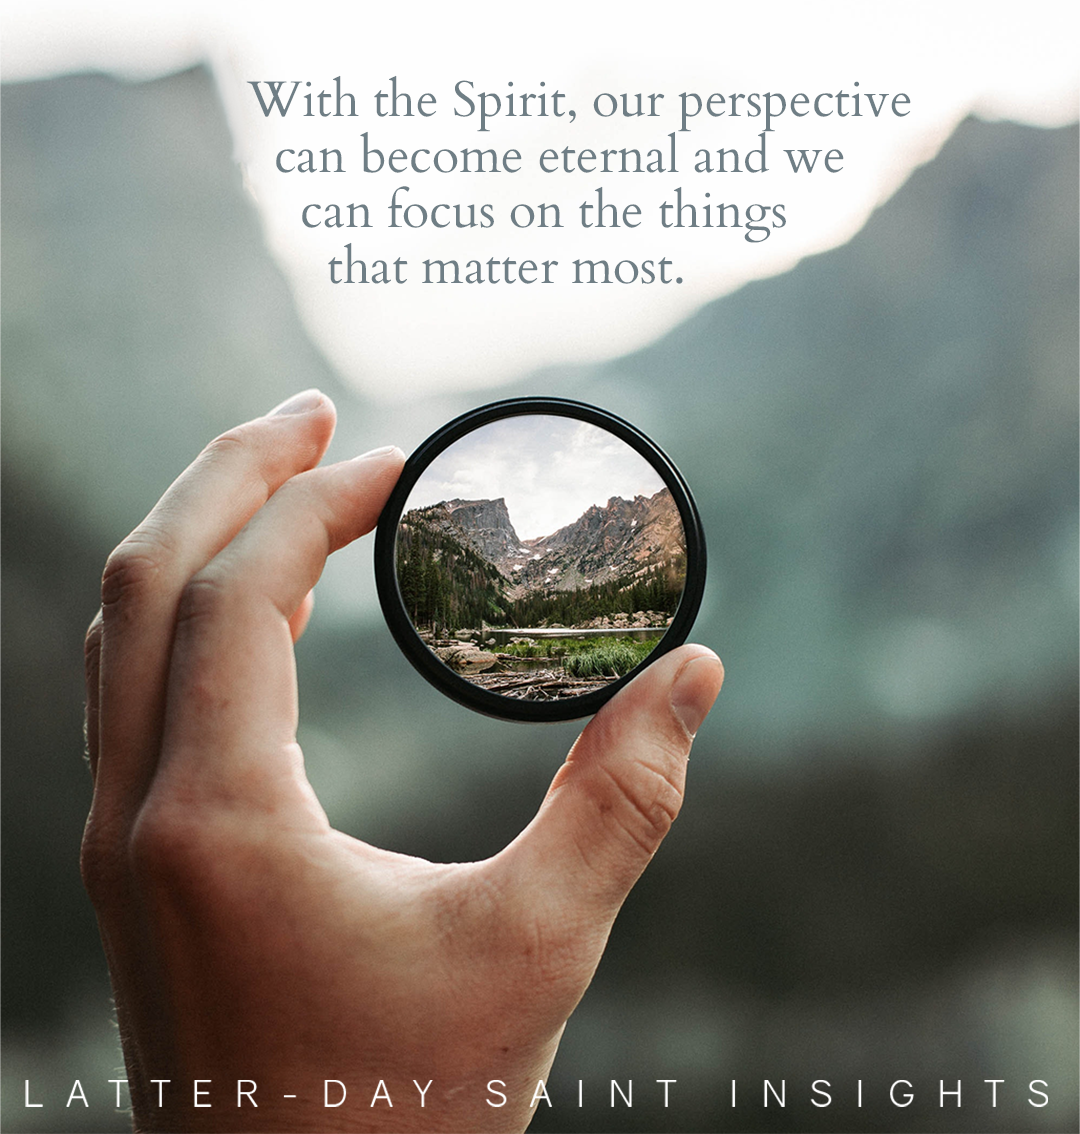 Someone holding a lens up to a blurry background. The scene is only clear through the lens. Quote: "With the Spirit, our perspective can become eternal and we can focus on the things that matter most."